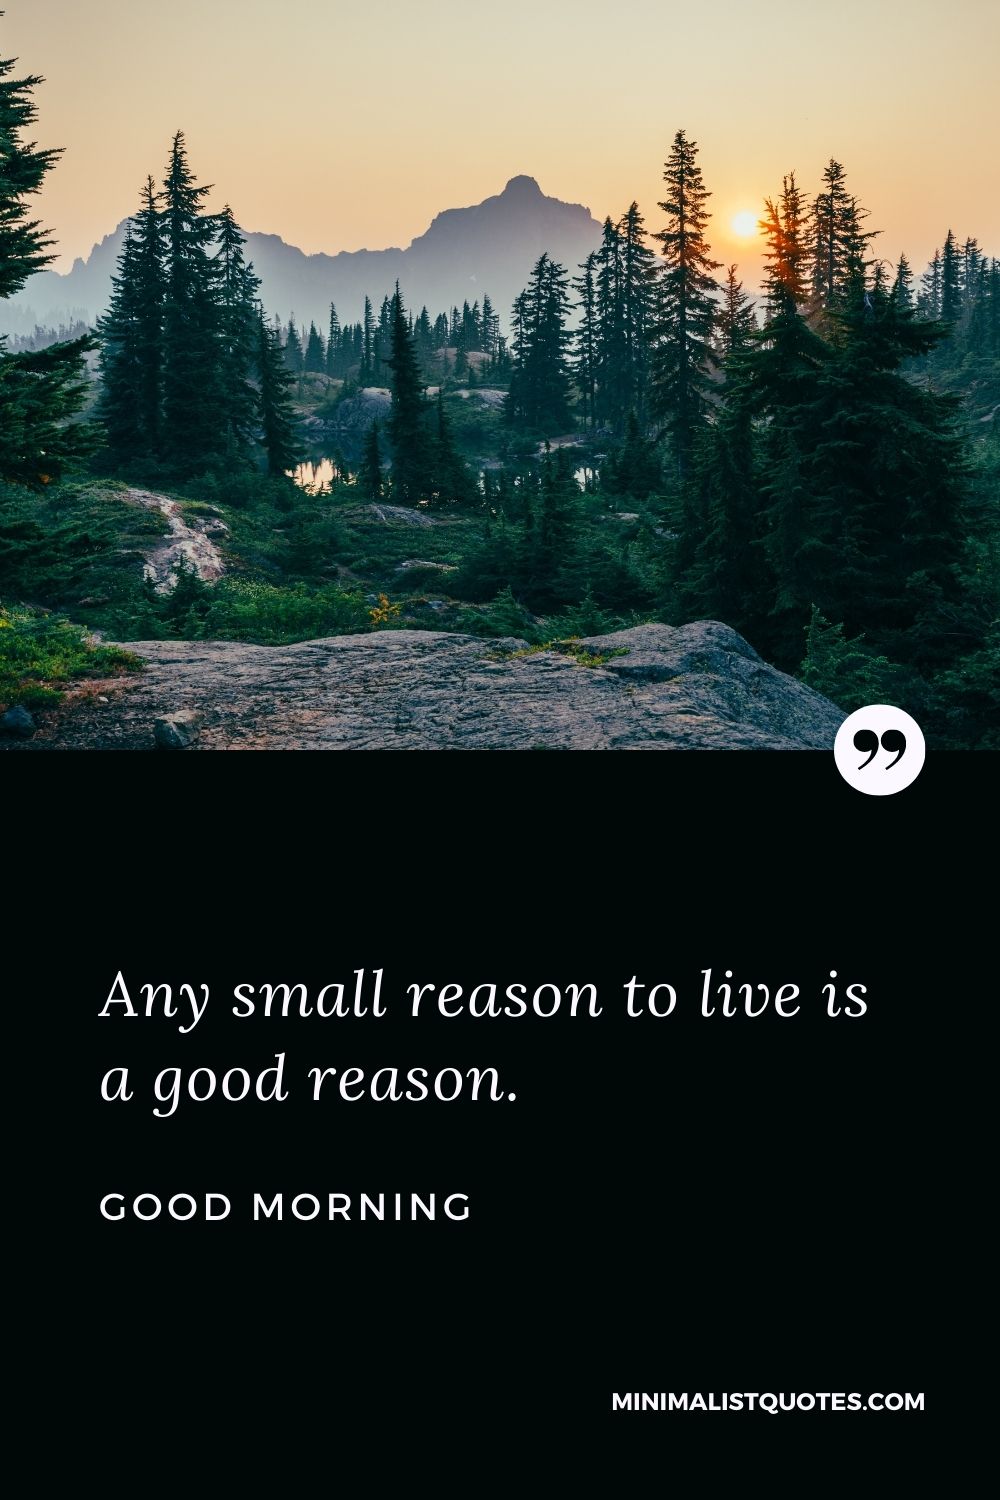 Good Morning Wish & Message With Image: Any small reason to live is a good reason.